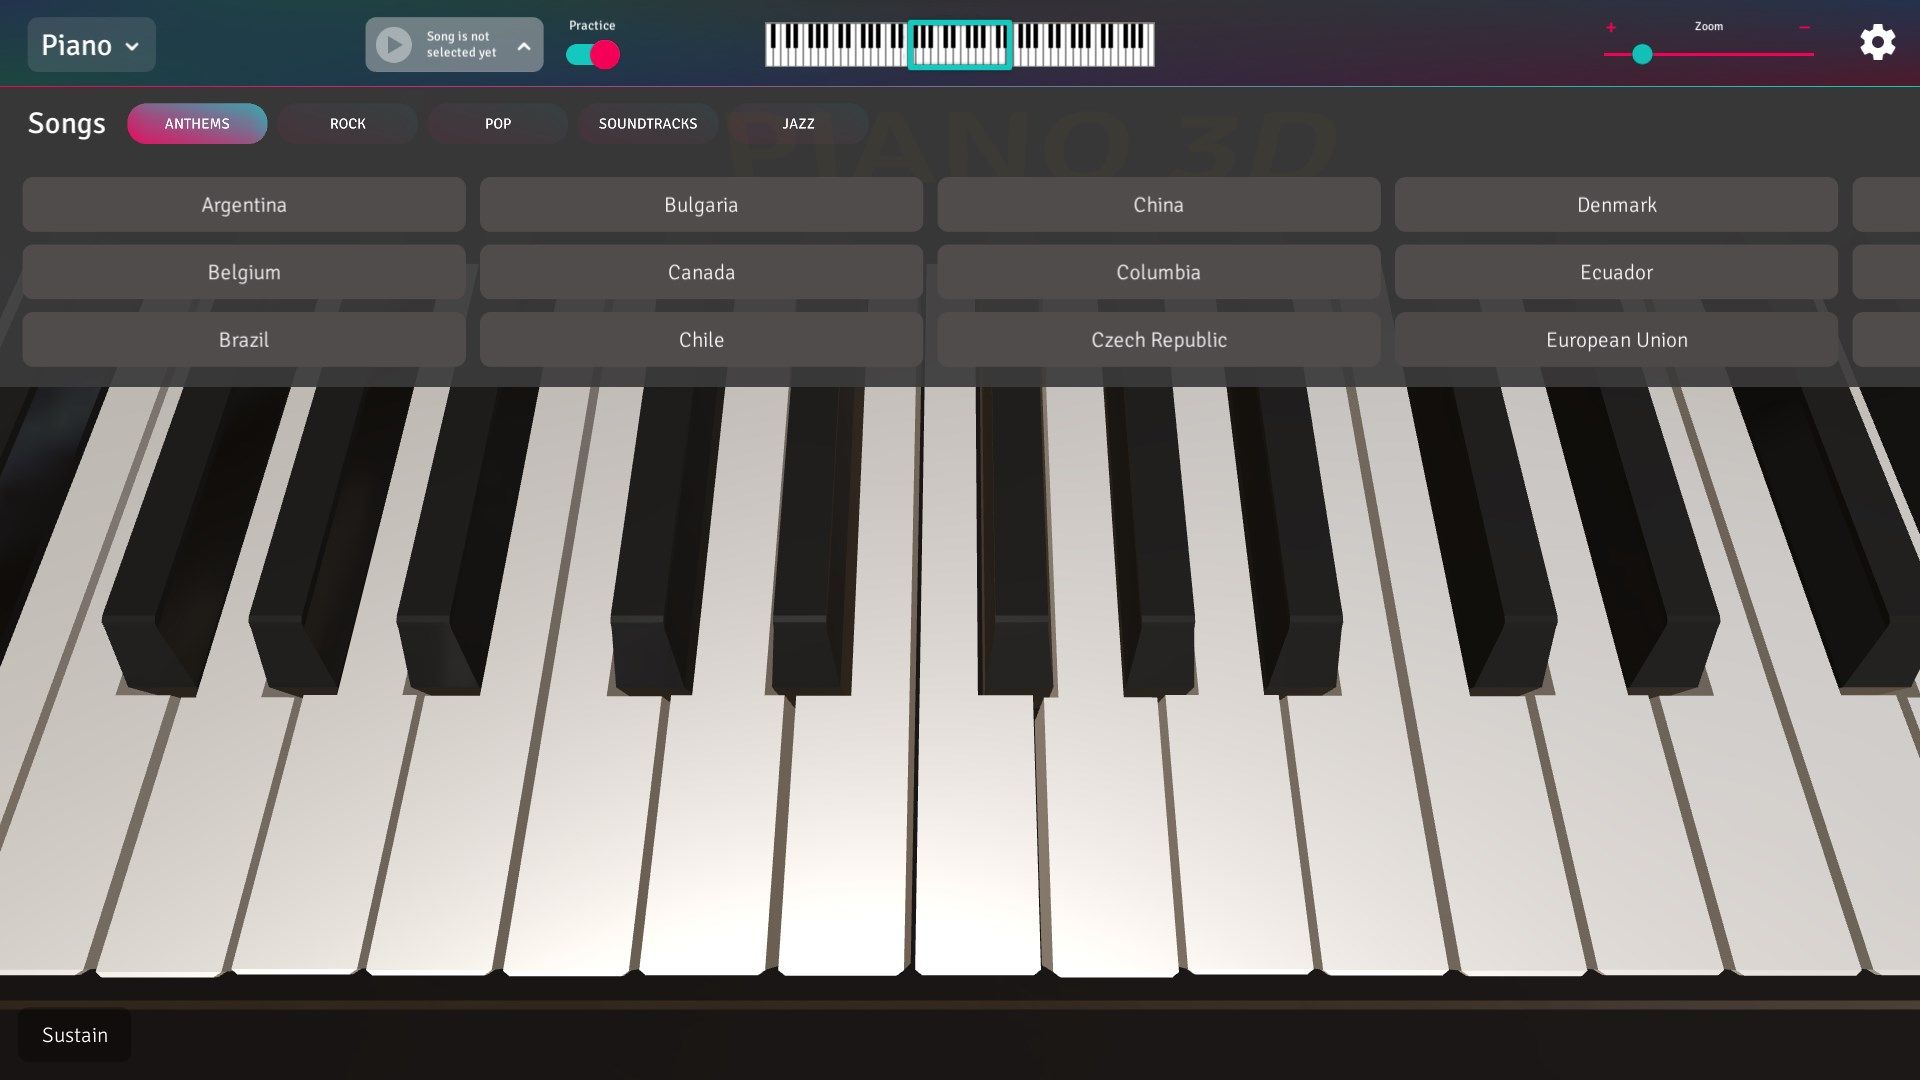 Built-in piano tutorials, including majority of national Anthems and much more!